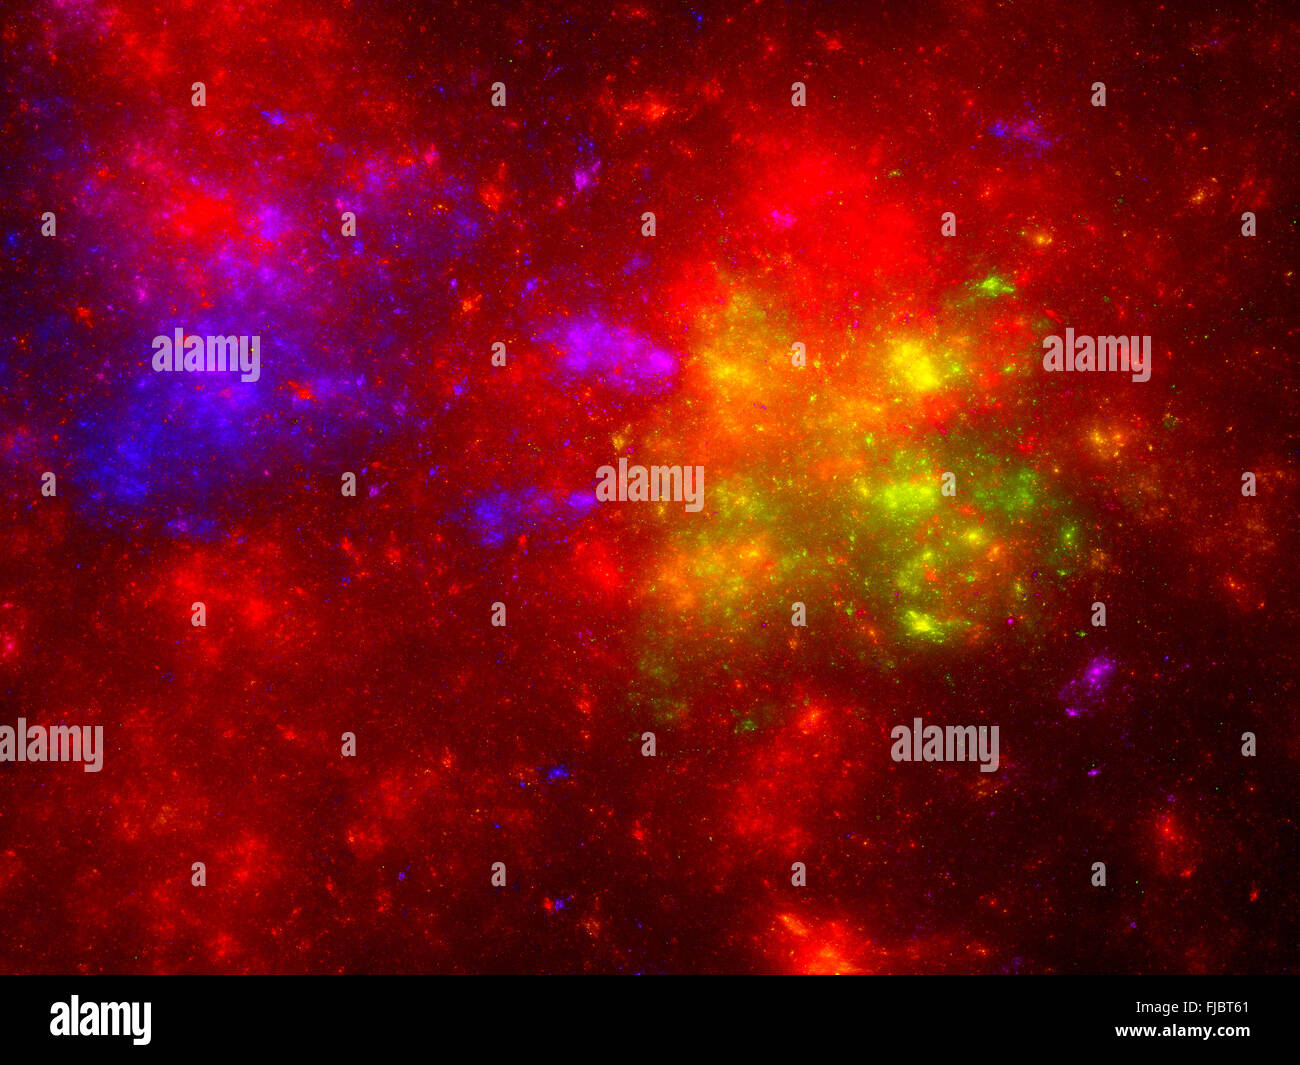 Colorful red starfield, computer generated abstract background Stock Photo